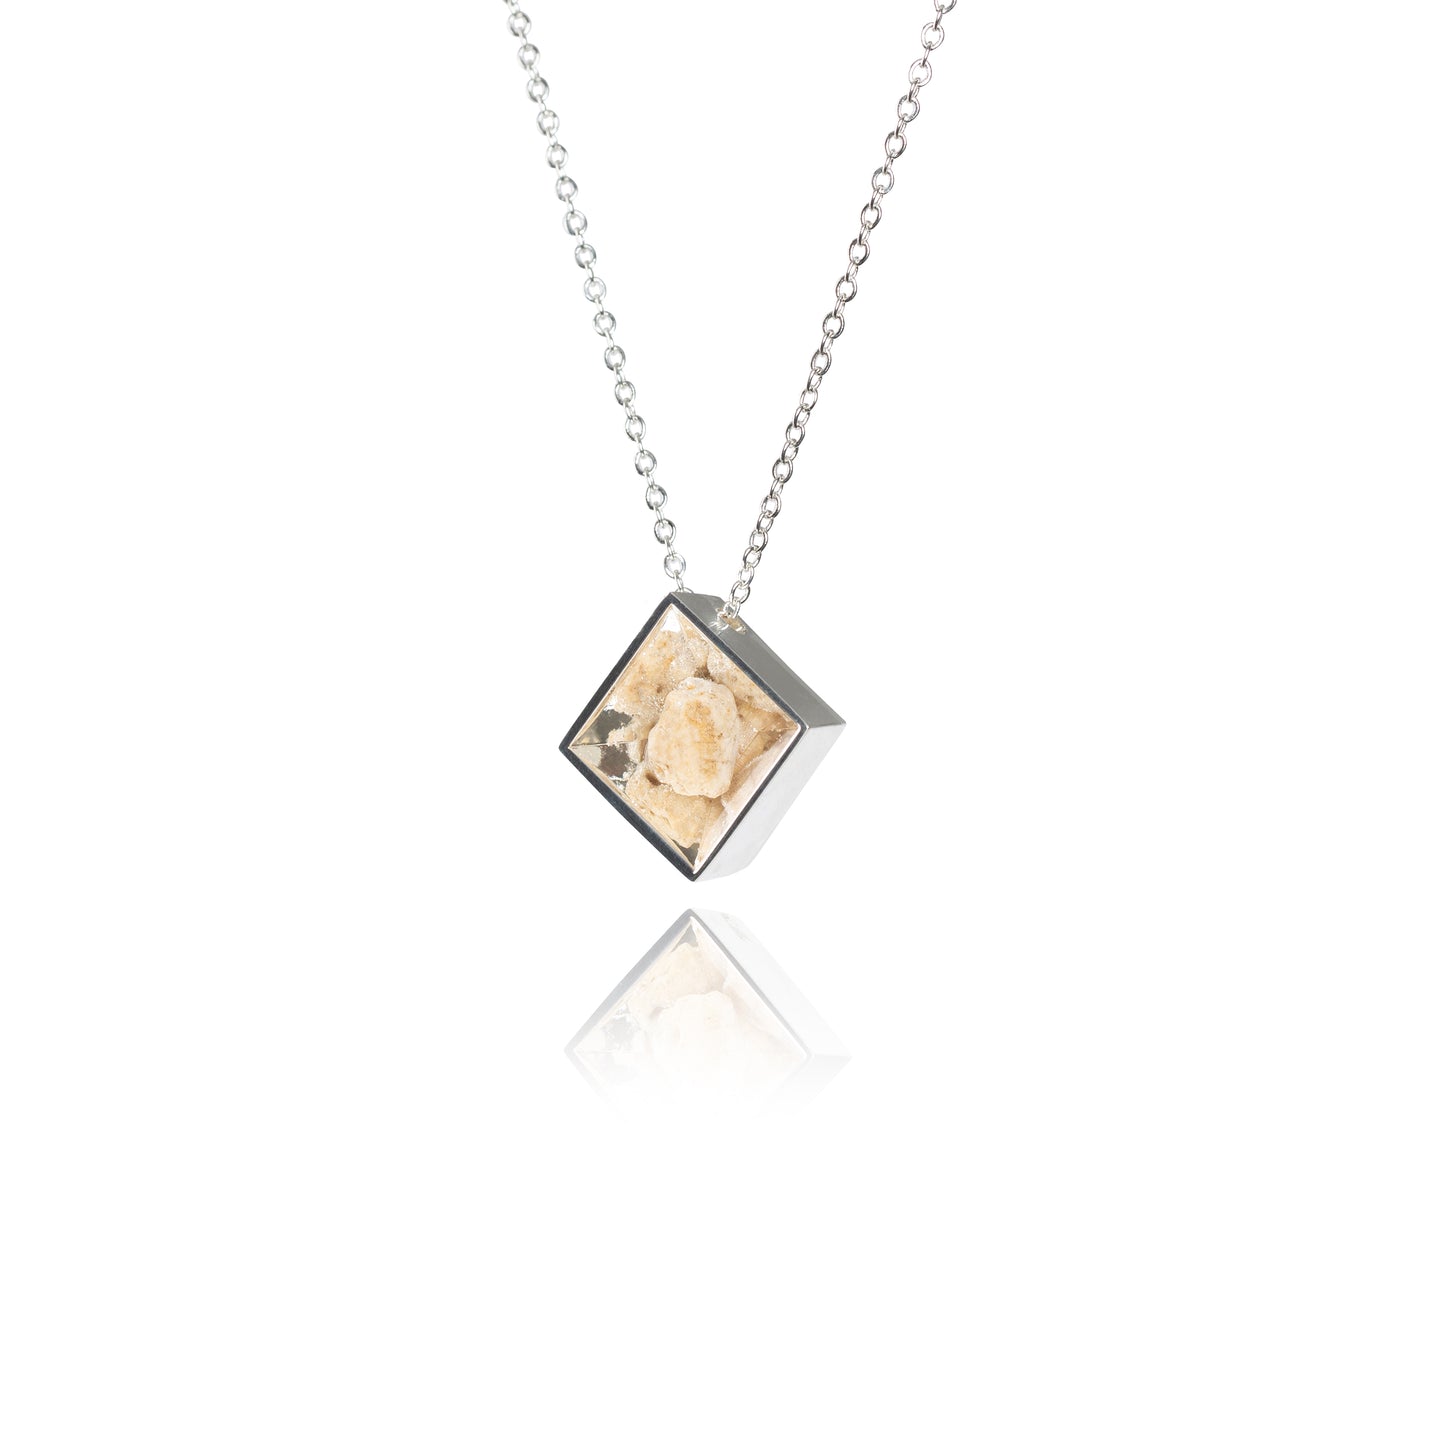 A side view of a small natural tan stone sitting in the middle of a diamond shaped metal pendant in a silver color on the outside and bright tan color on the inside. The pendant is hanging on silver chain.